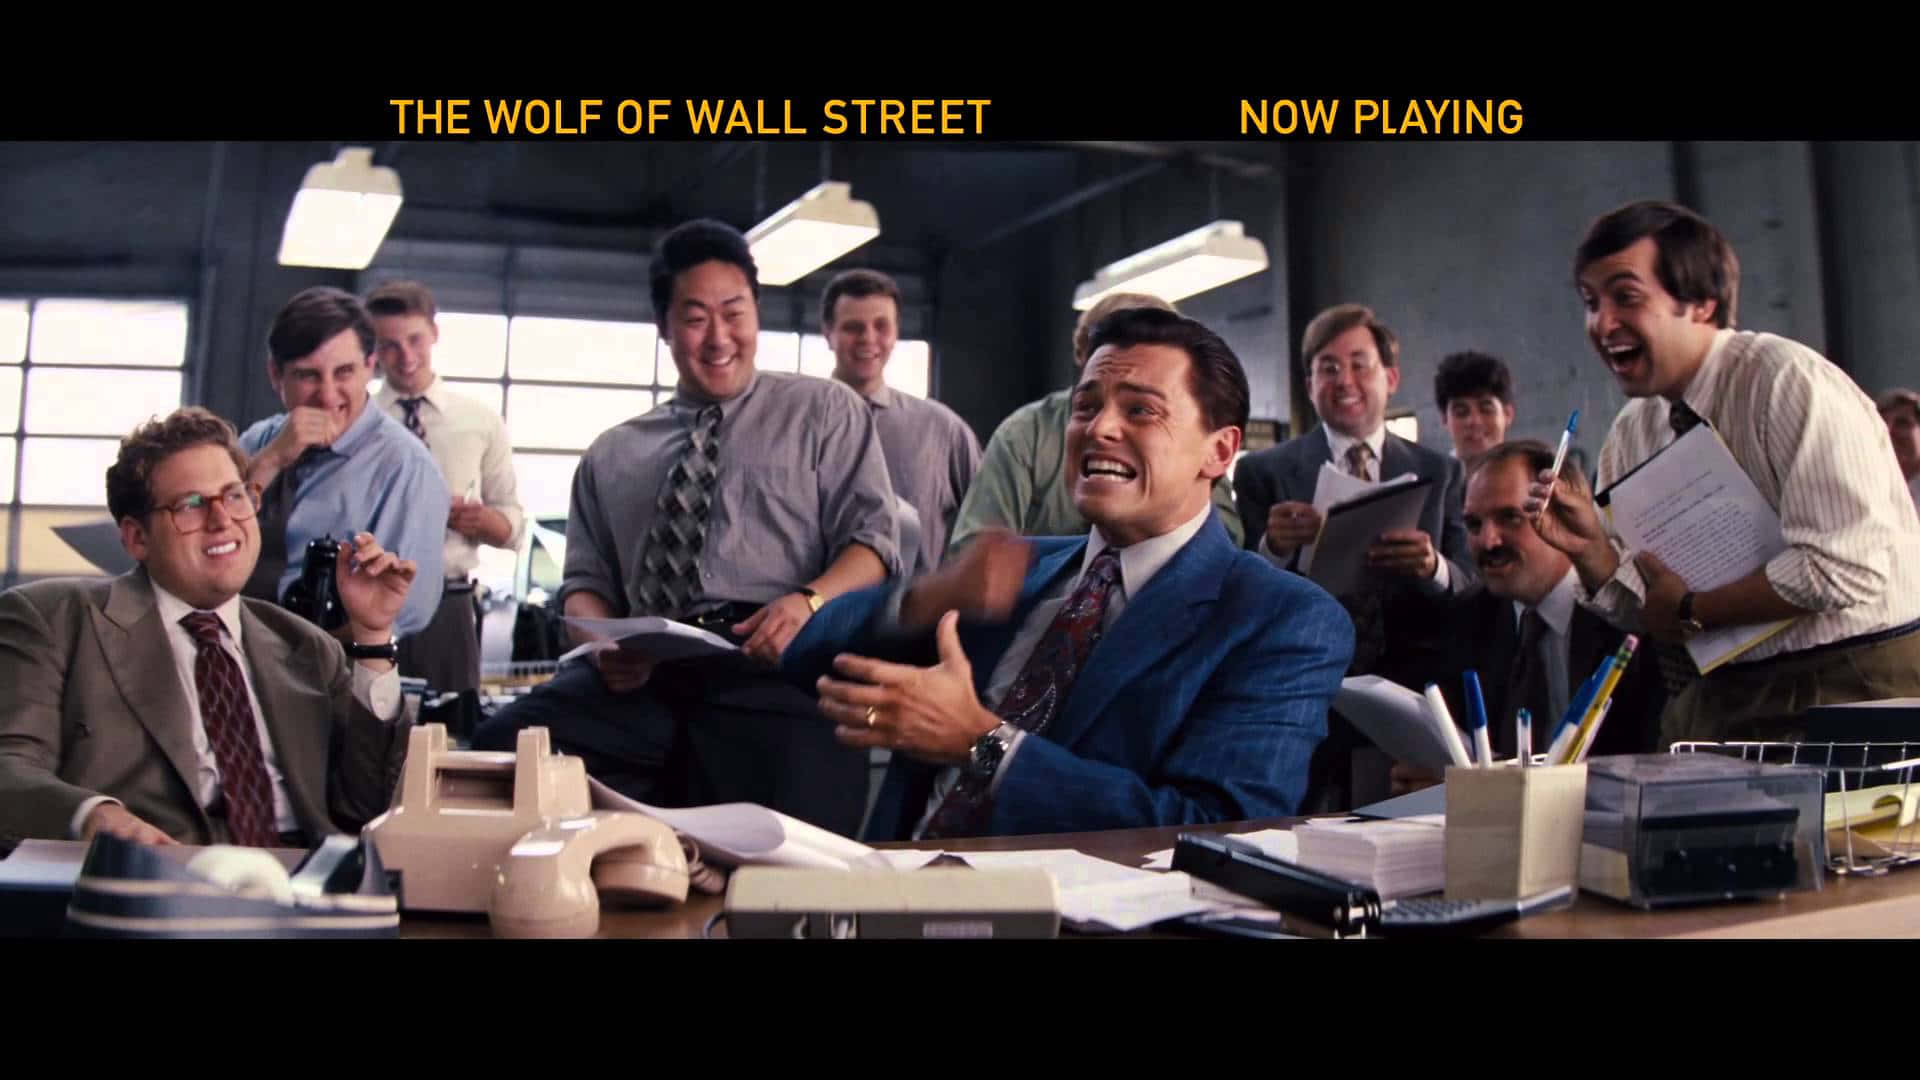 The World Of Wall Street Background